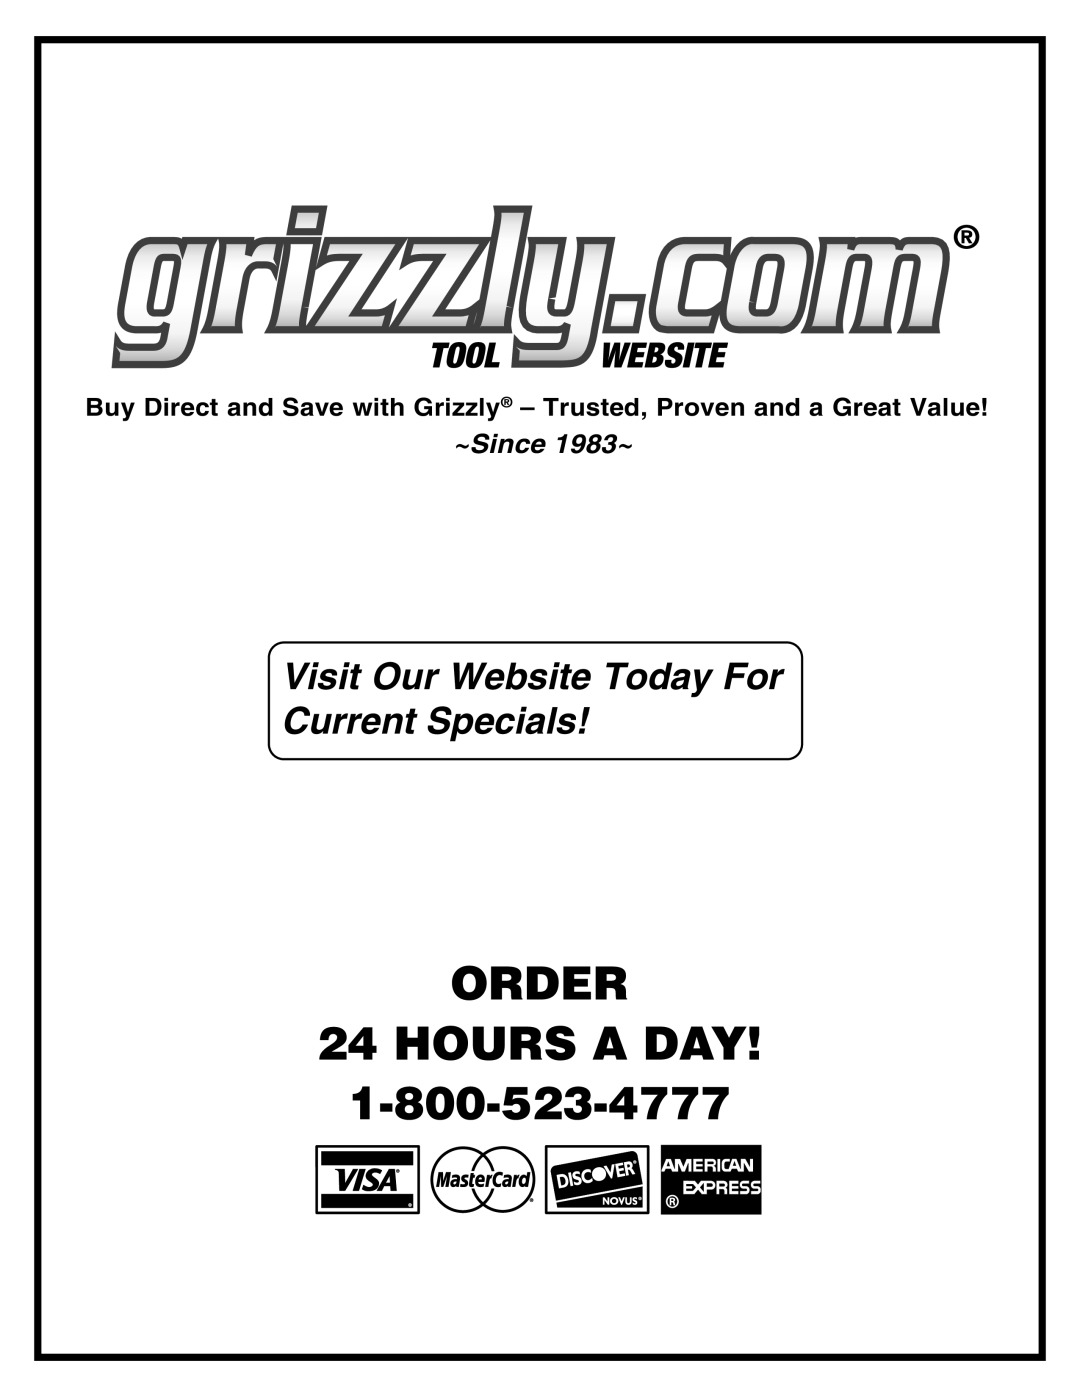 Grizzly T10024 Buy Direct and Save with Grizzly - Trusted, Proven and a Great Value, ORDER 24 HOURS A DAY, ~Since 1983~ 